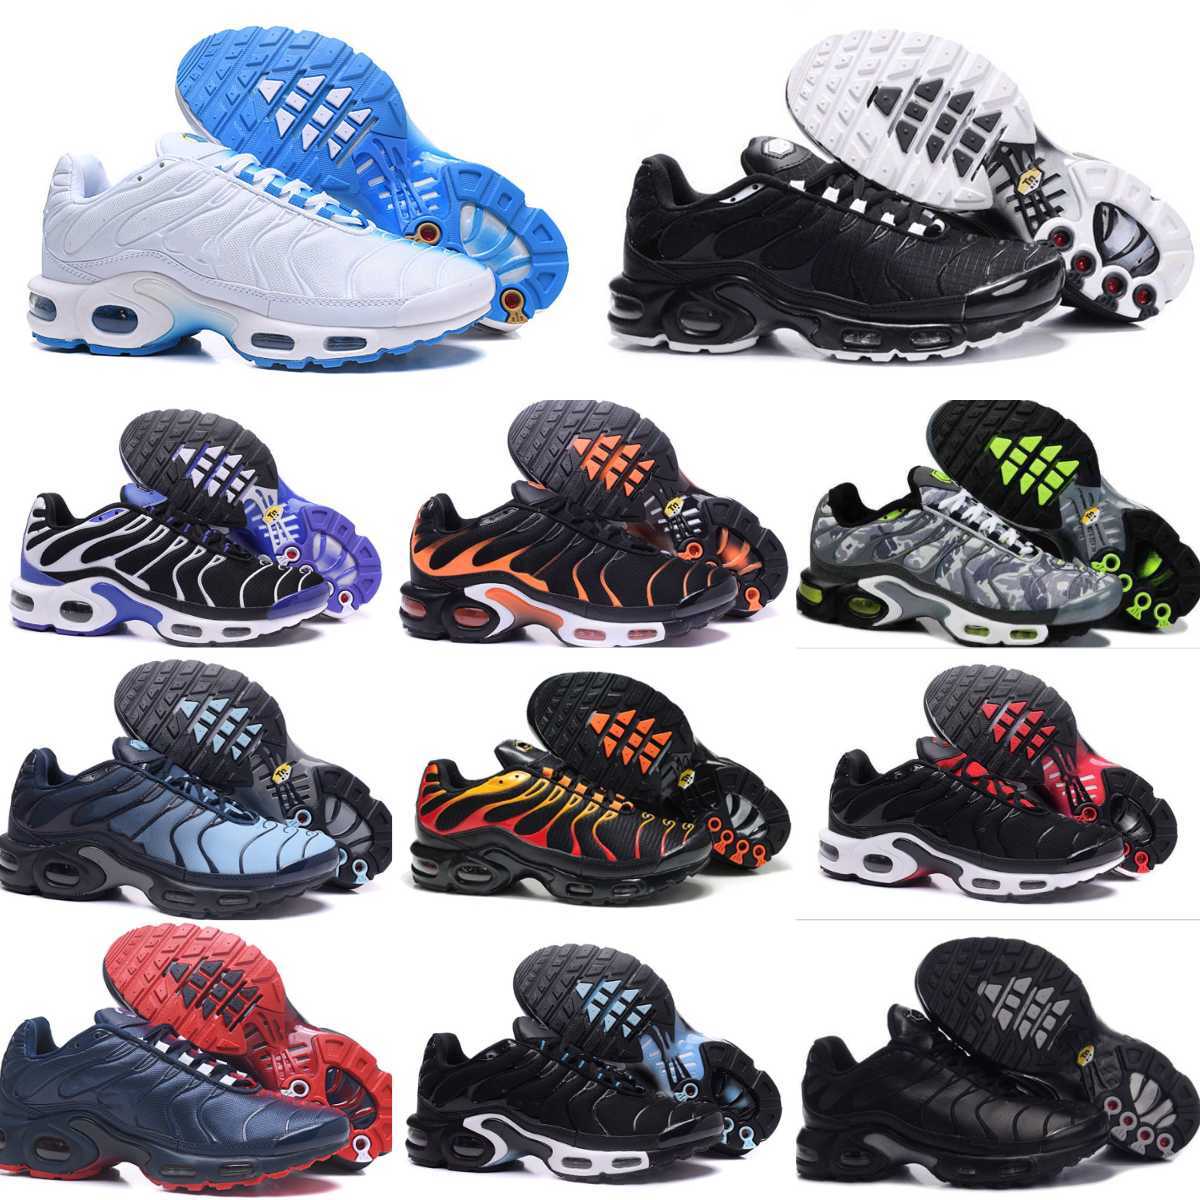 

2023 Mens Tn Running Shoes Tns OG Triple Black White Be True Teal Volt Blue Crinkled Metal Chaussures Requin Max Plus Ultra Seafoam Grey Frost Pink Designer Sneakers Y6, Please contact us